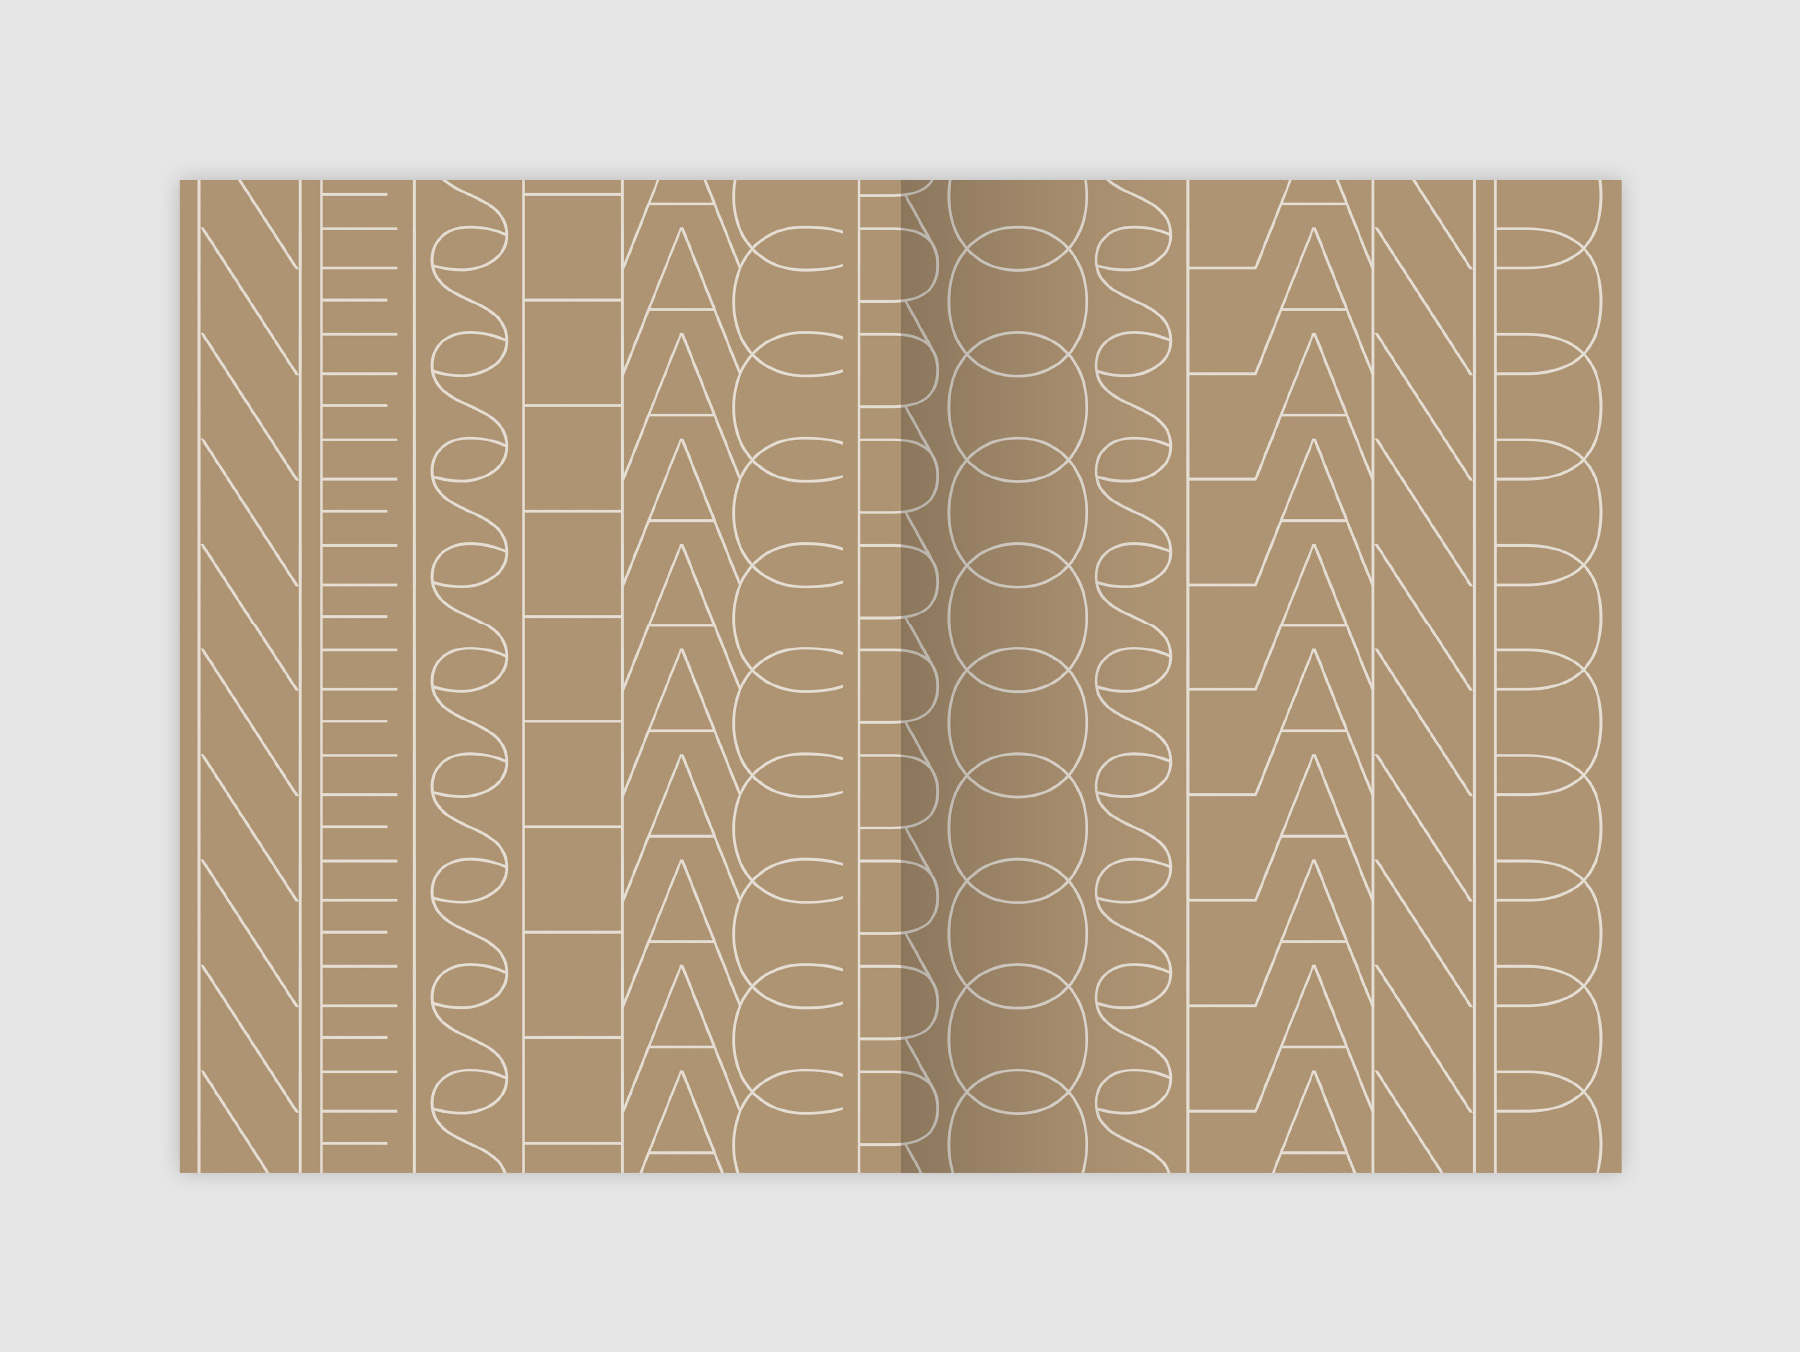 Life of a Pattern title spread showing a repeat pattern of the designer's name in a thin sans serif